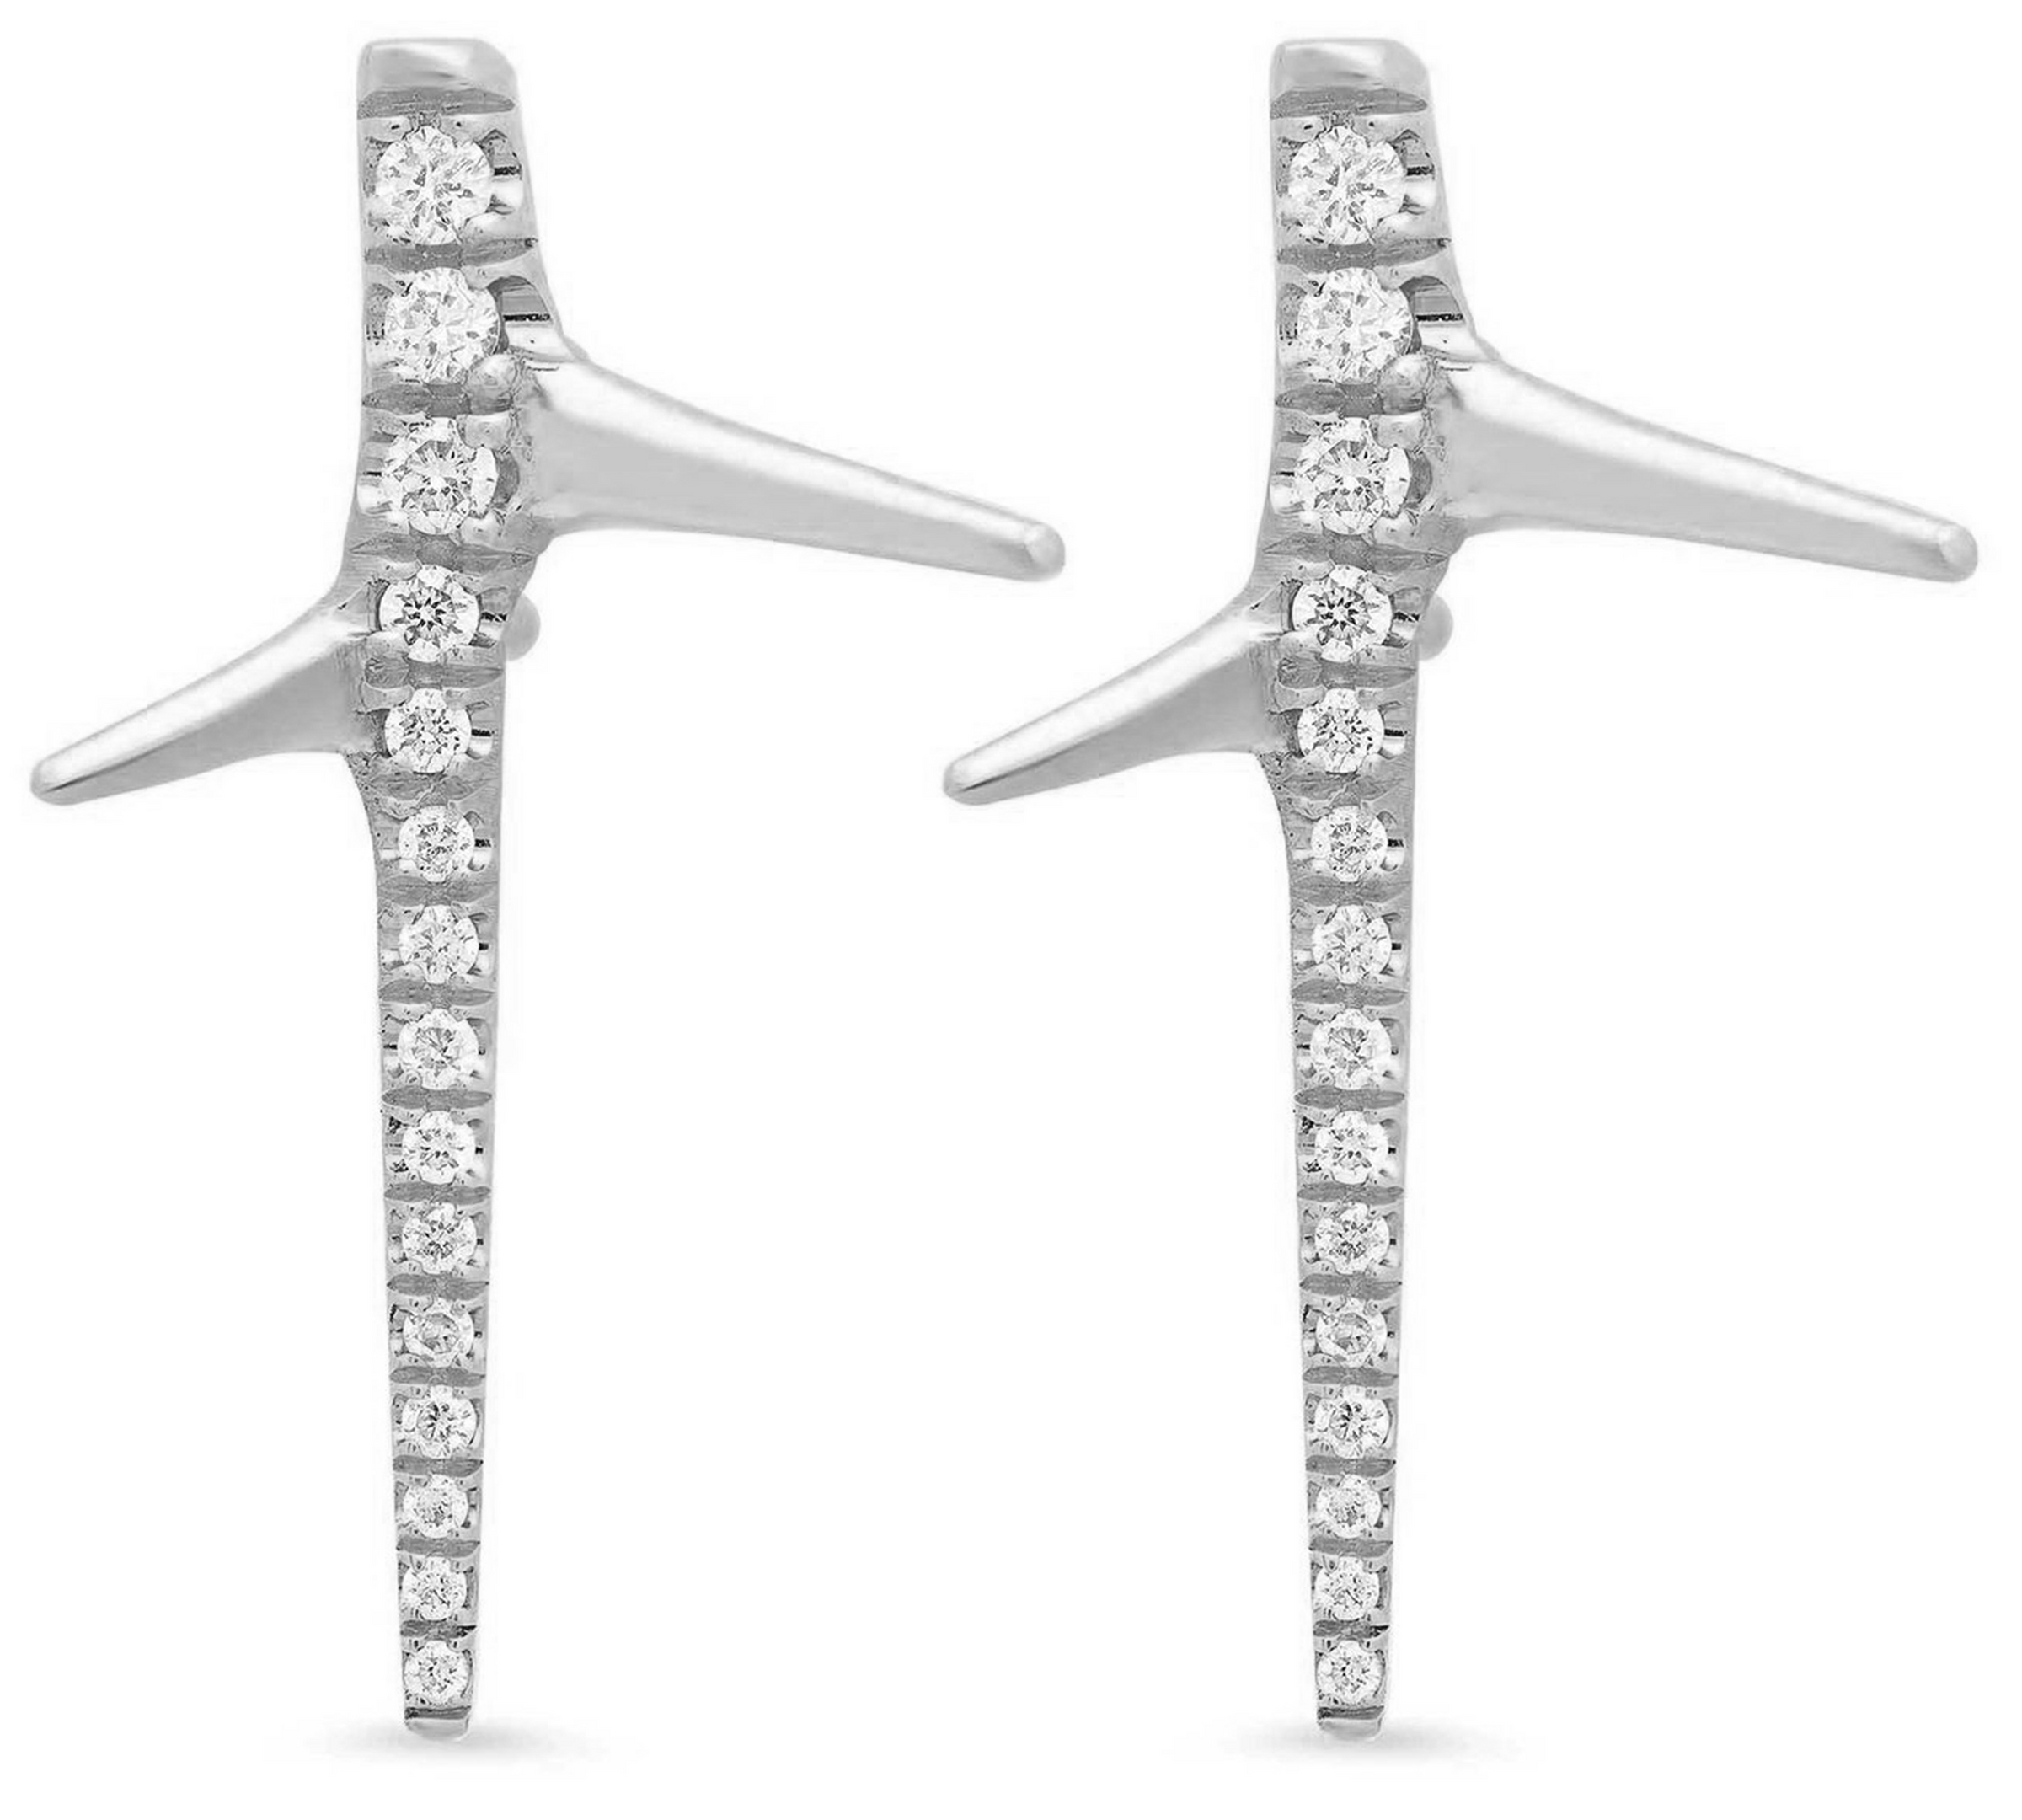 Thorn Studs Stud Earrings Elisabeth Bell Jewelry White Gold with Diamonds  